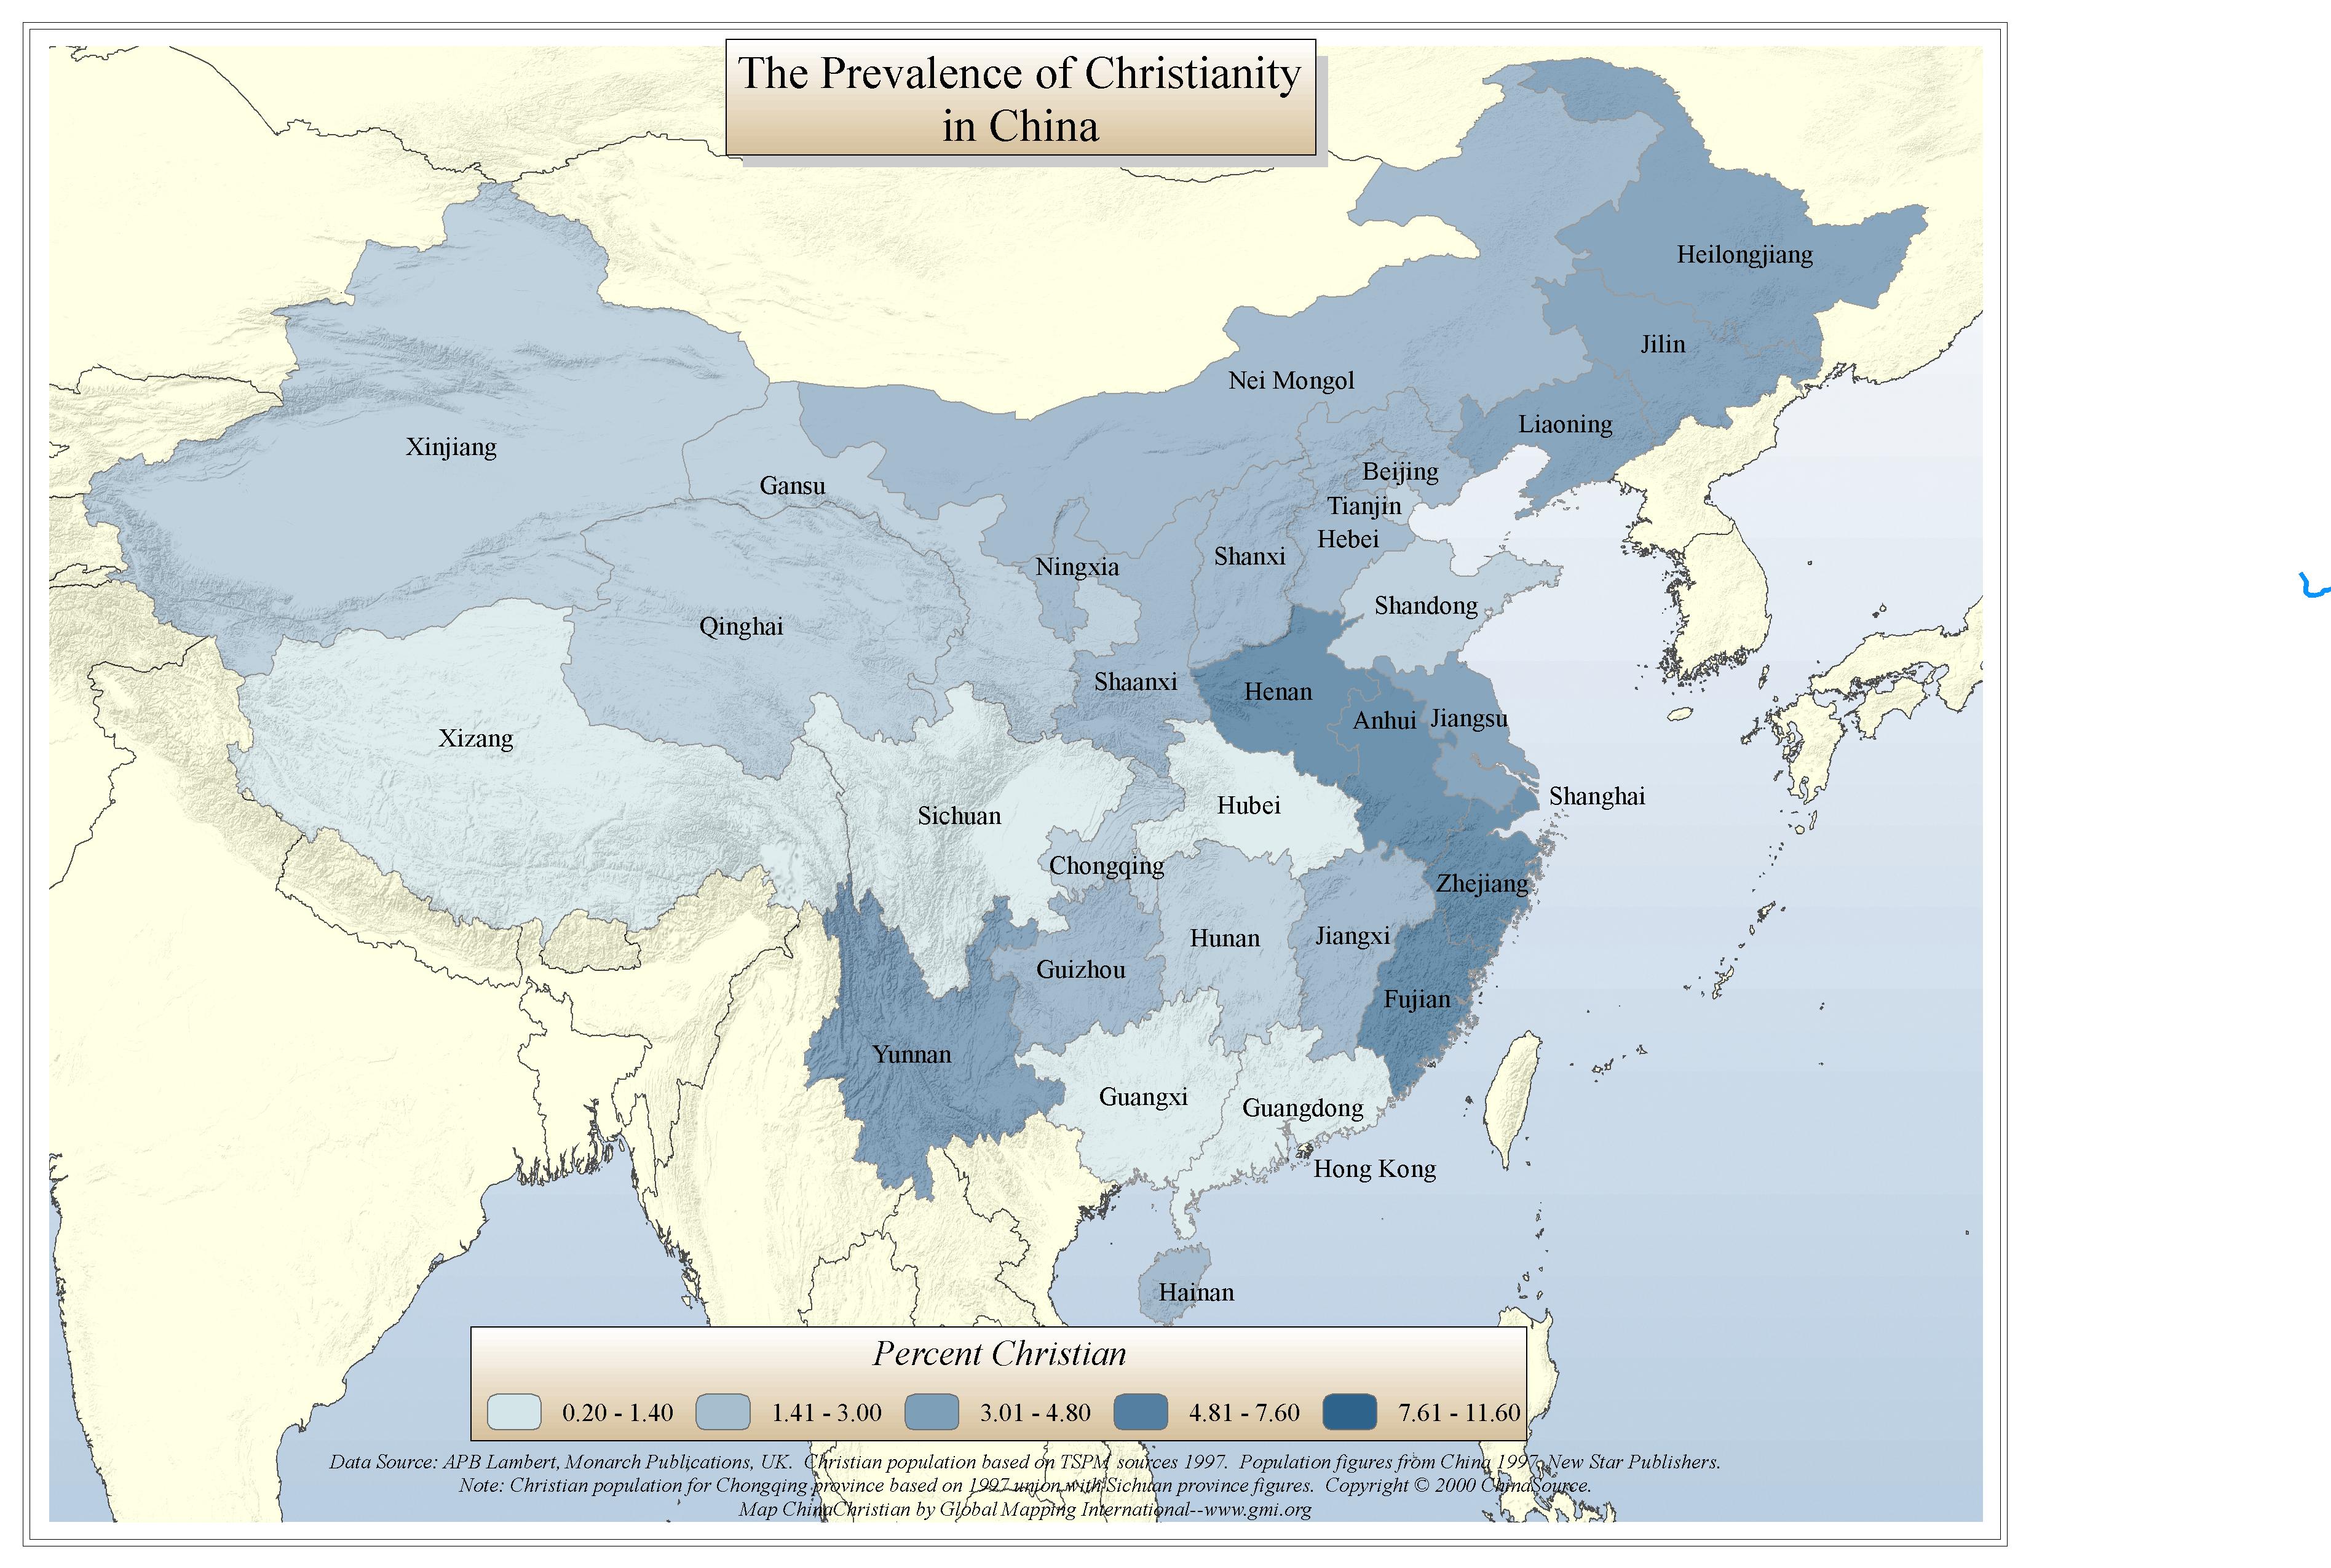 The Prevalence of Christianity in China